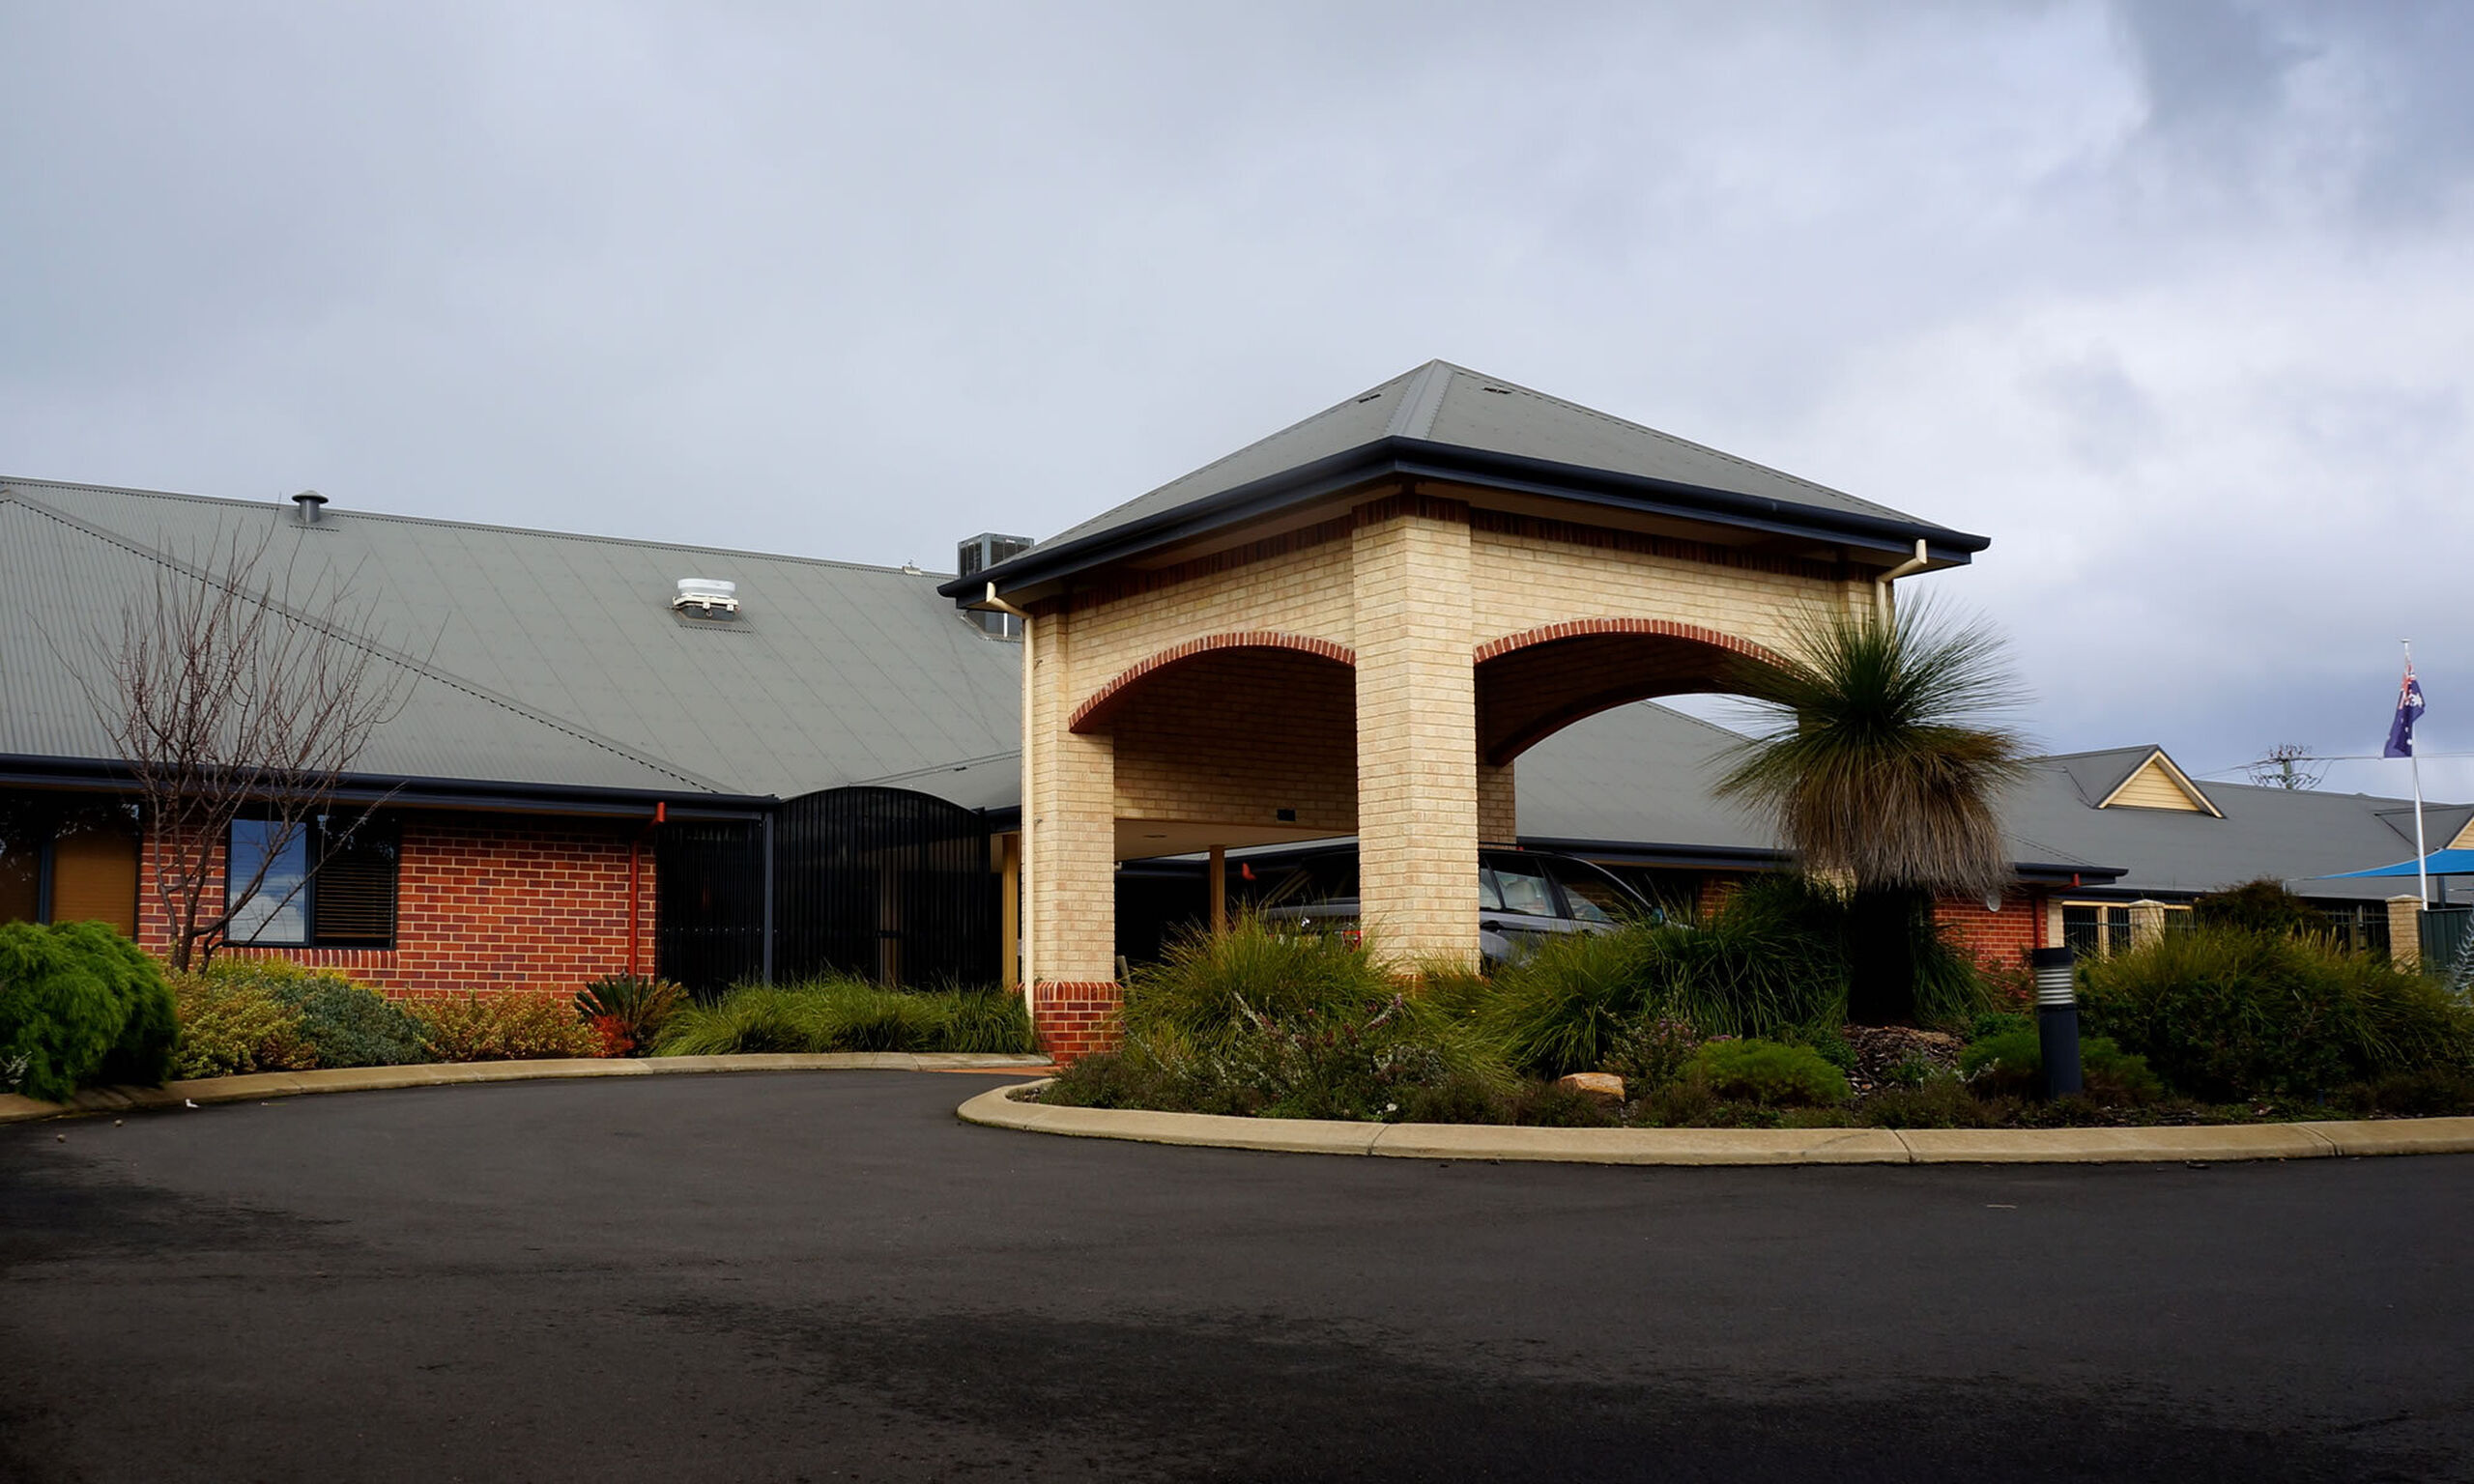 main entry for nursing home residents at baptistcare mirrambeena aged care home in margaret river wa